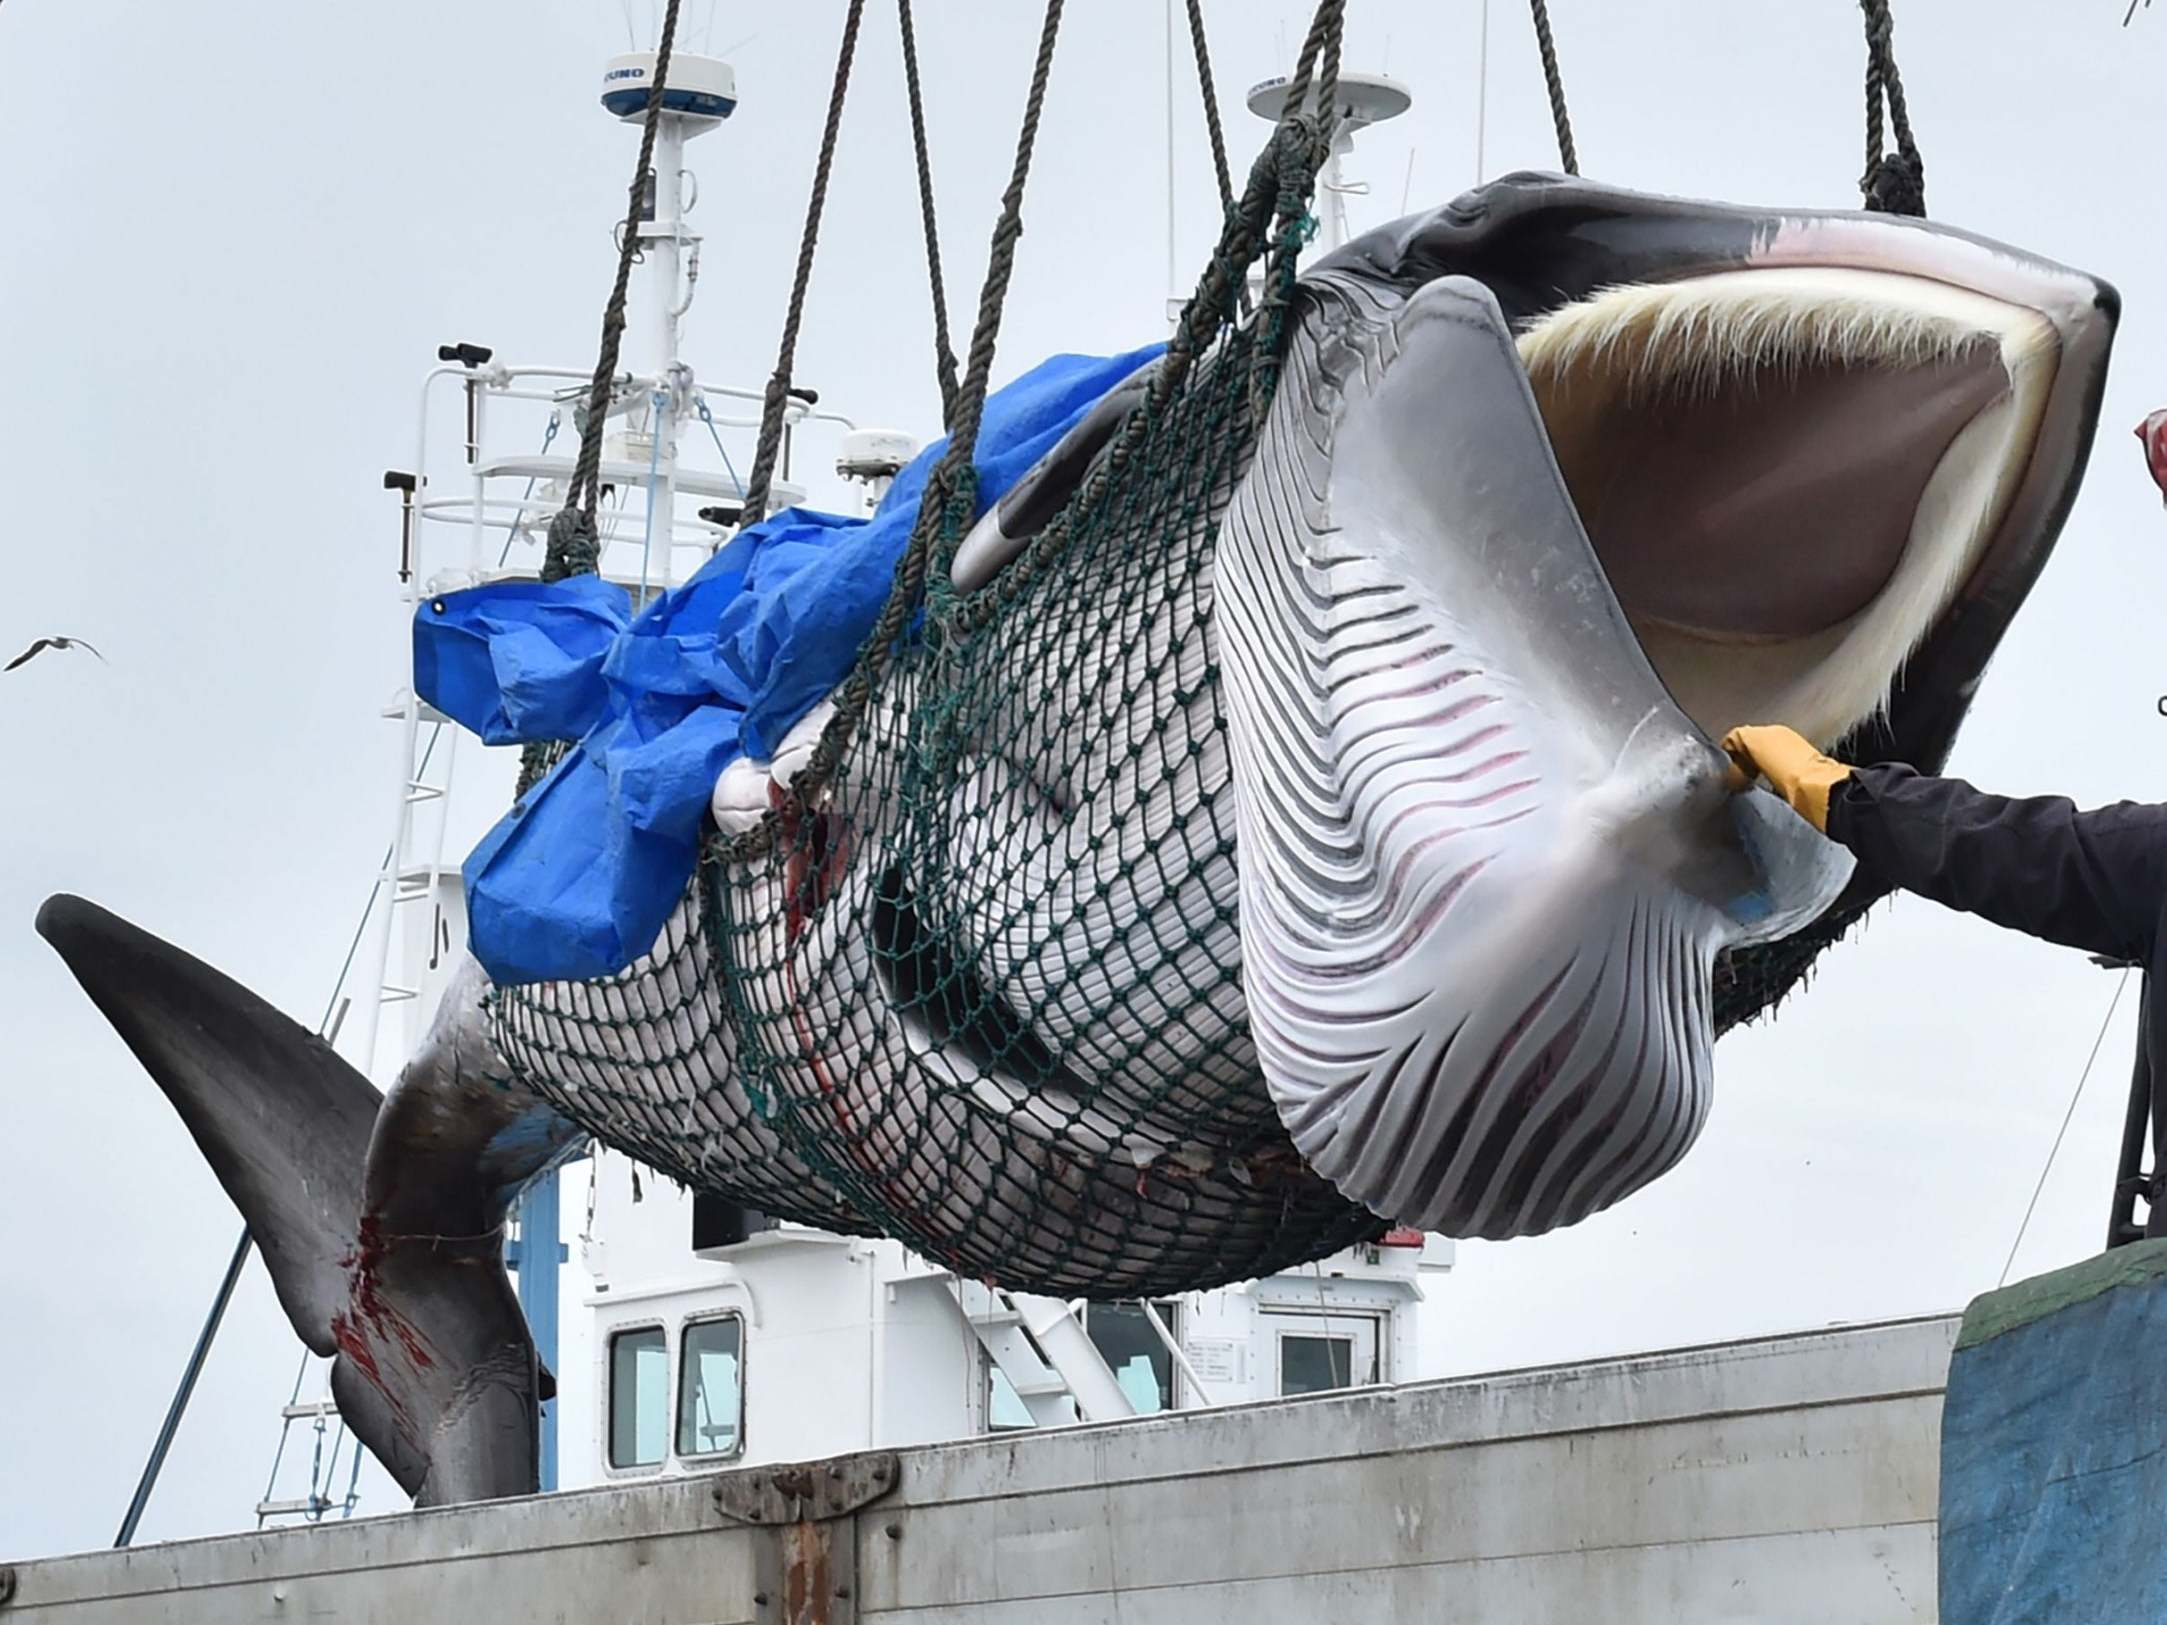 A captured minke whale is lifted by a crane into a truck bed at a port in Kushiro, Hokkaido prefecture